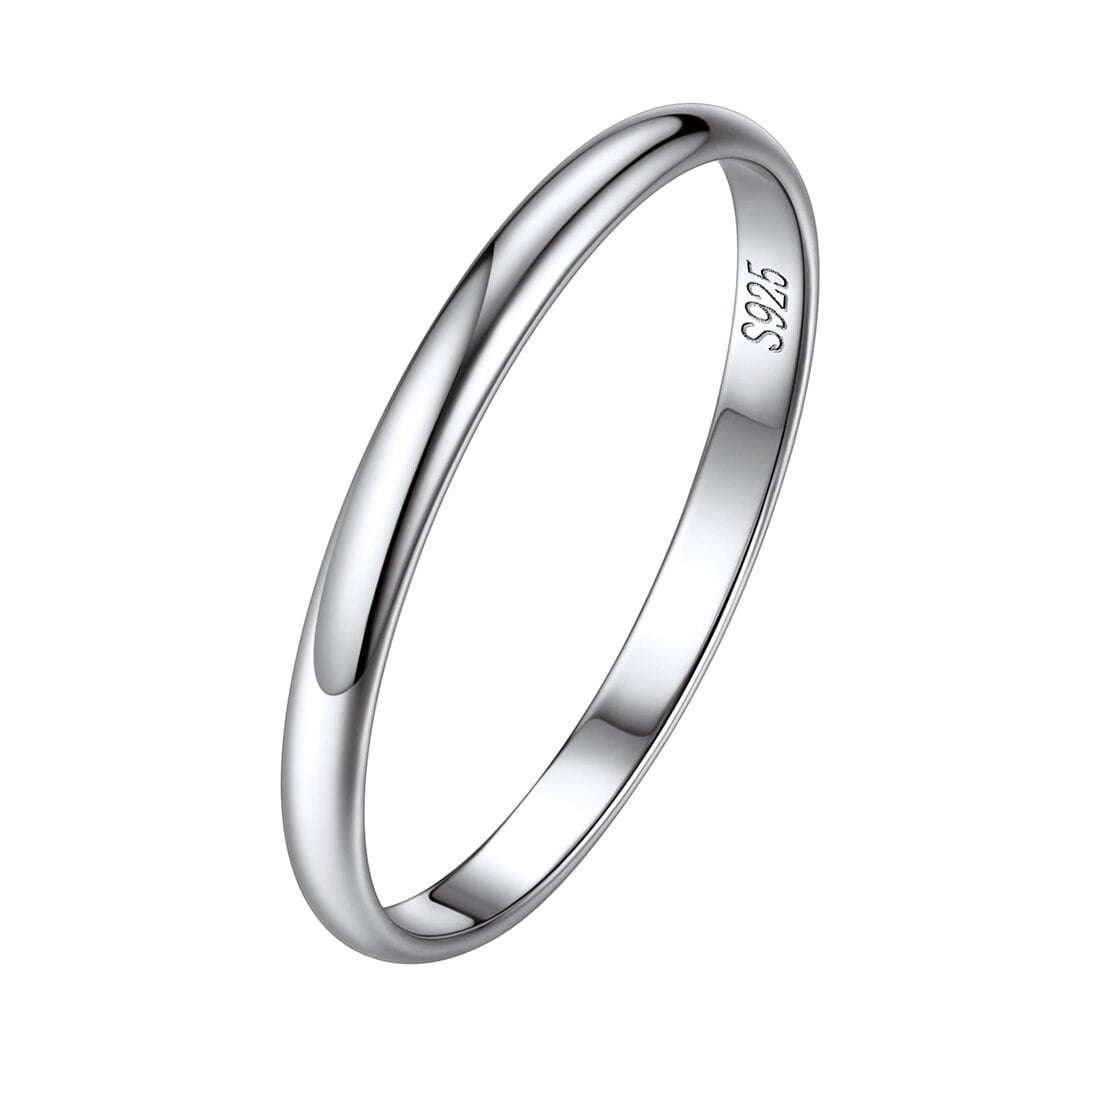 Fashion Petite Bypass Wrap Dainty Simple Plain Band Ring 925 Sterling Silver